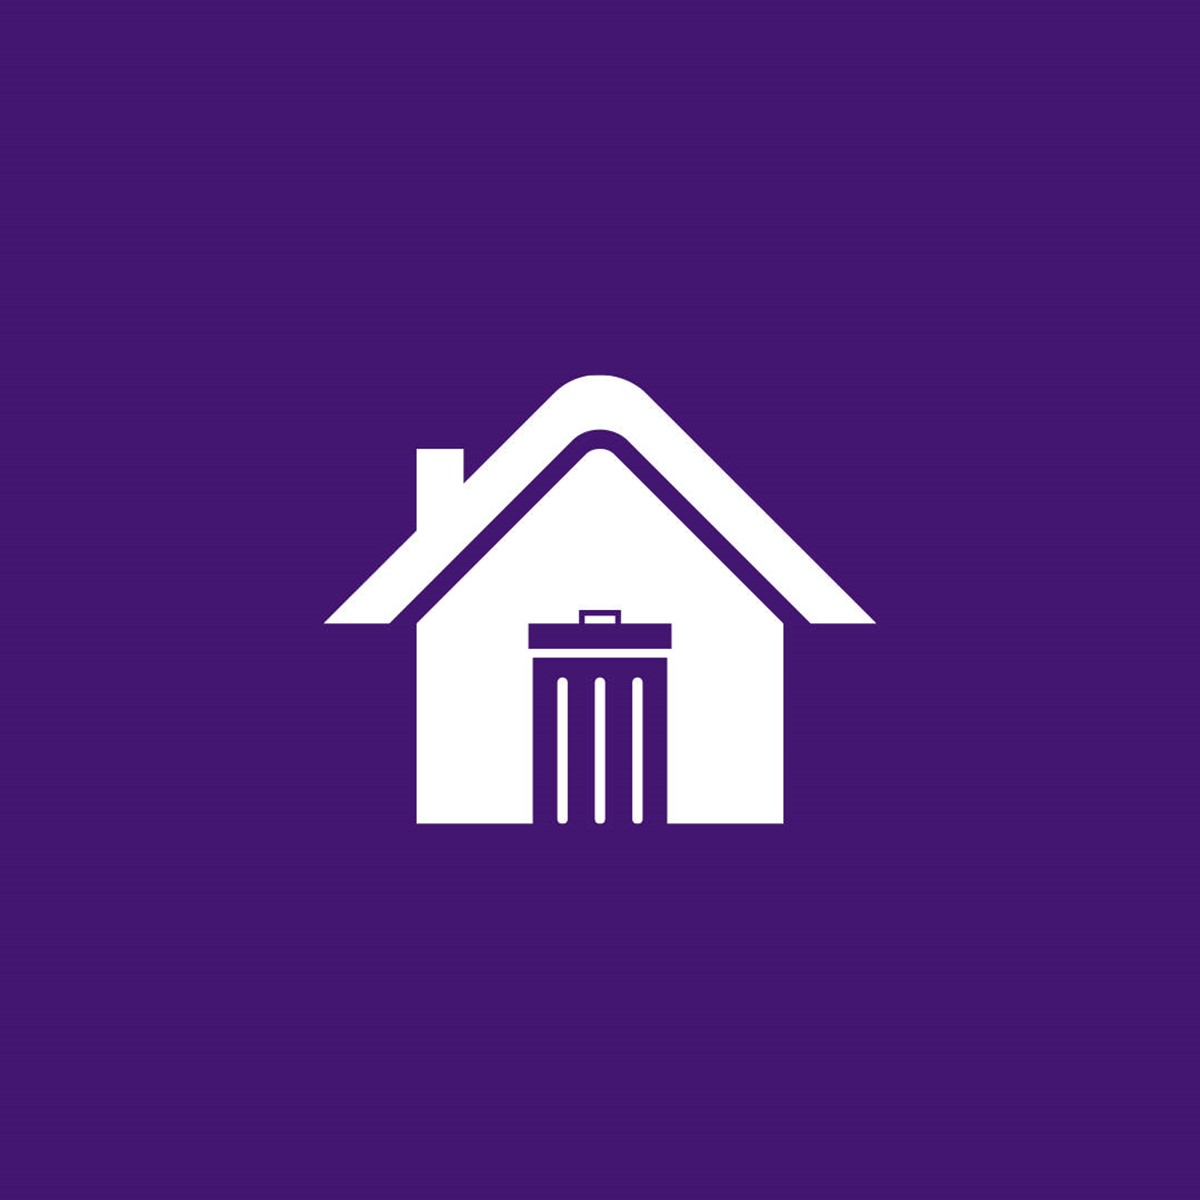 Your Dsposal white house logo on purple background. Brand identity by Superfried.